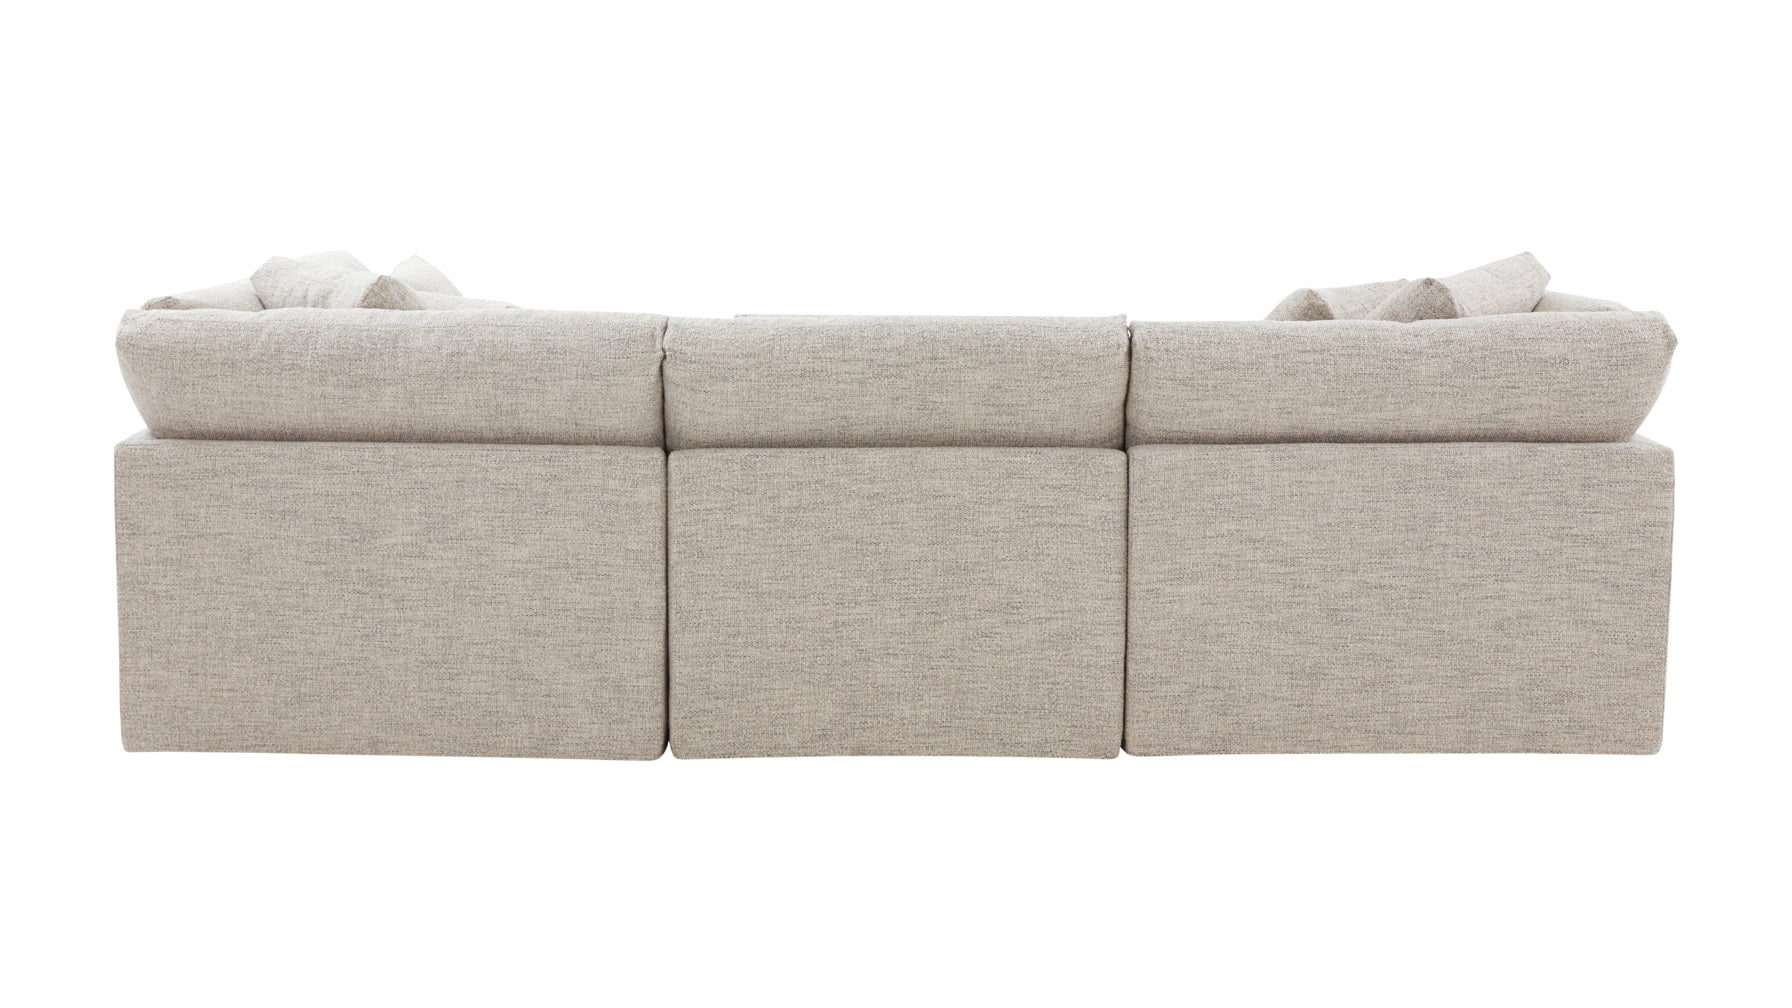 Get Together™ 4-Piece Modular Sectional, Large, Oatmeal - Image 8